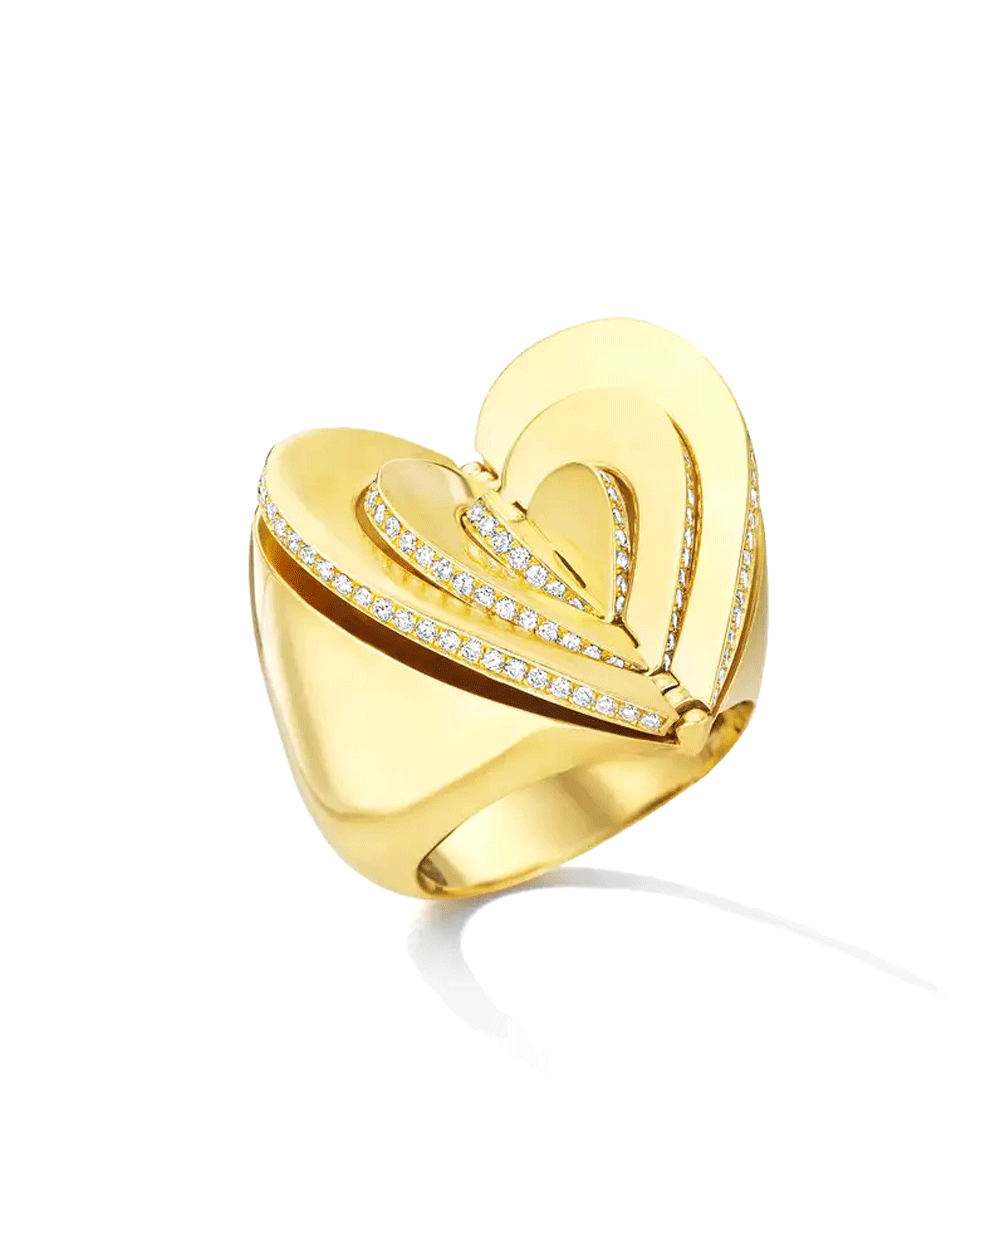 Gold and Diamond Endless Heart Cocktail Ring